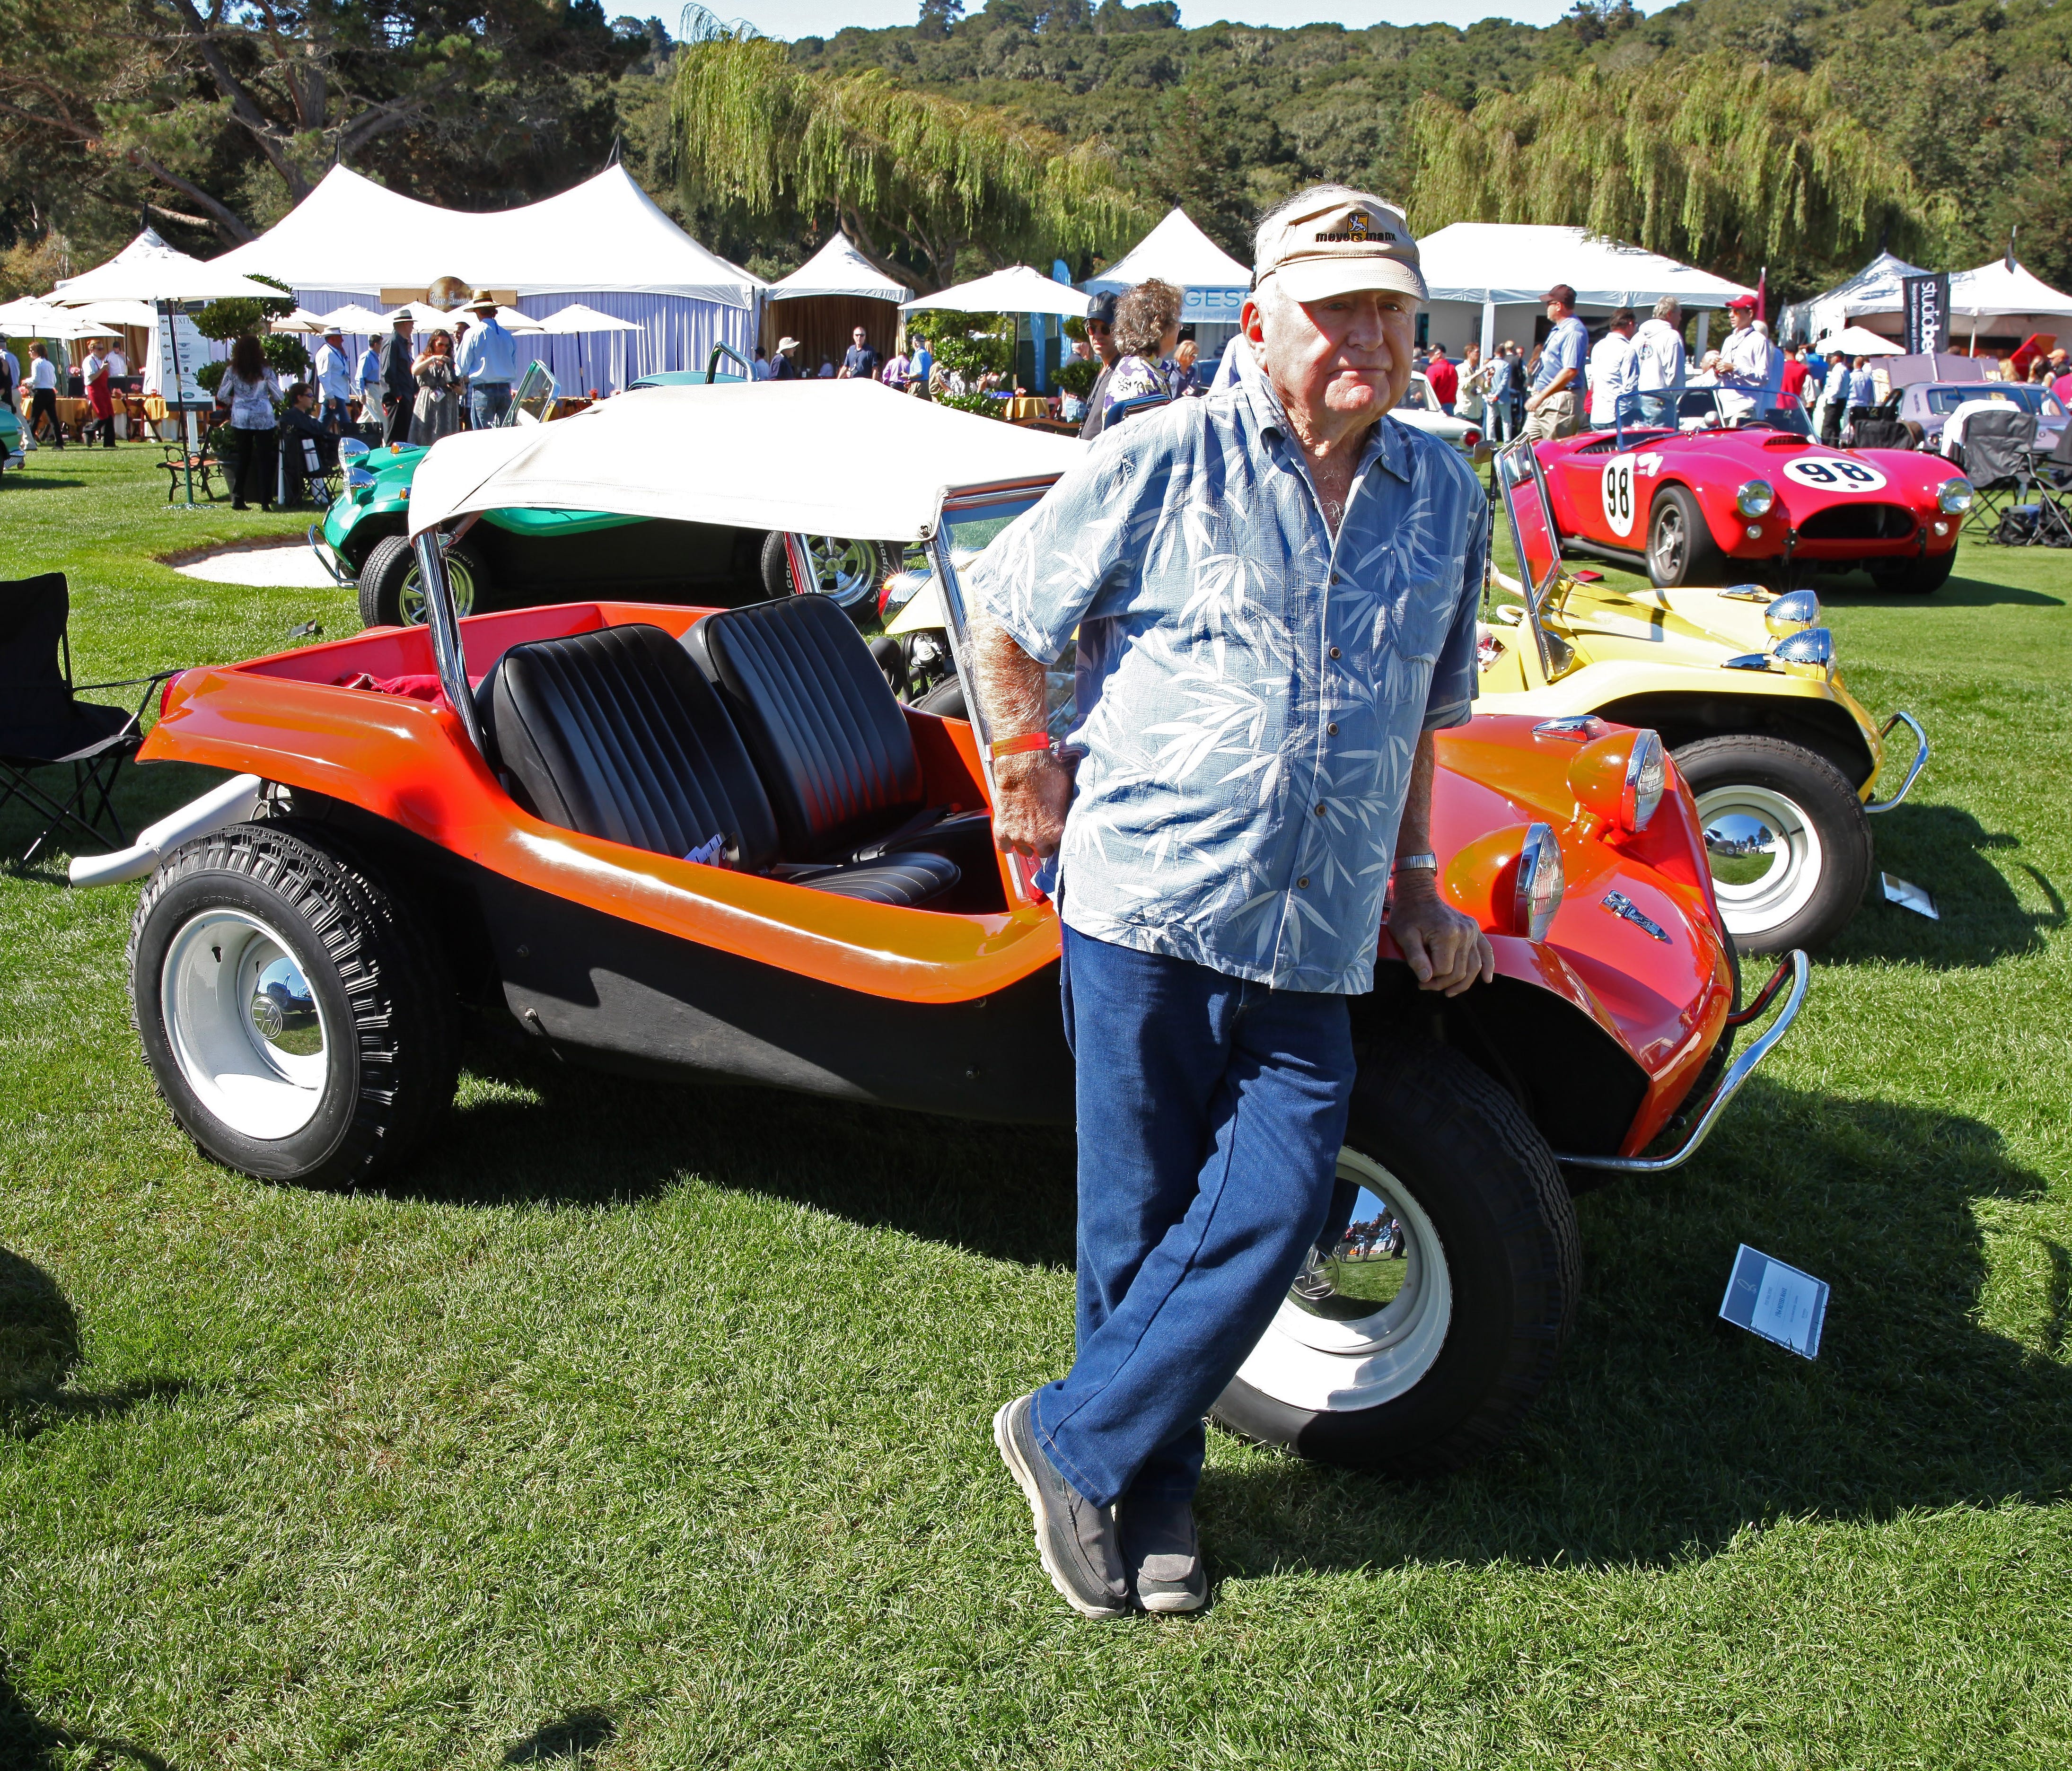 Bruce Meyers, inventor of the Meyers Manx, know to most as the Dune Buggy, stands next to the very first one he made. He and the car was on display at the Quial Motorsports Gathering. Celebrating it's 50th anniversary, Aug. 15, 2014.